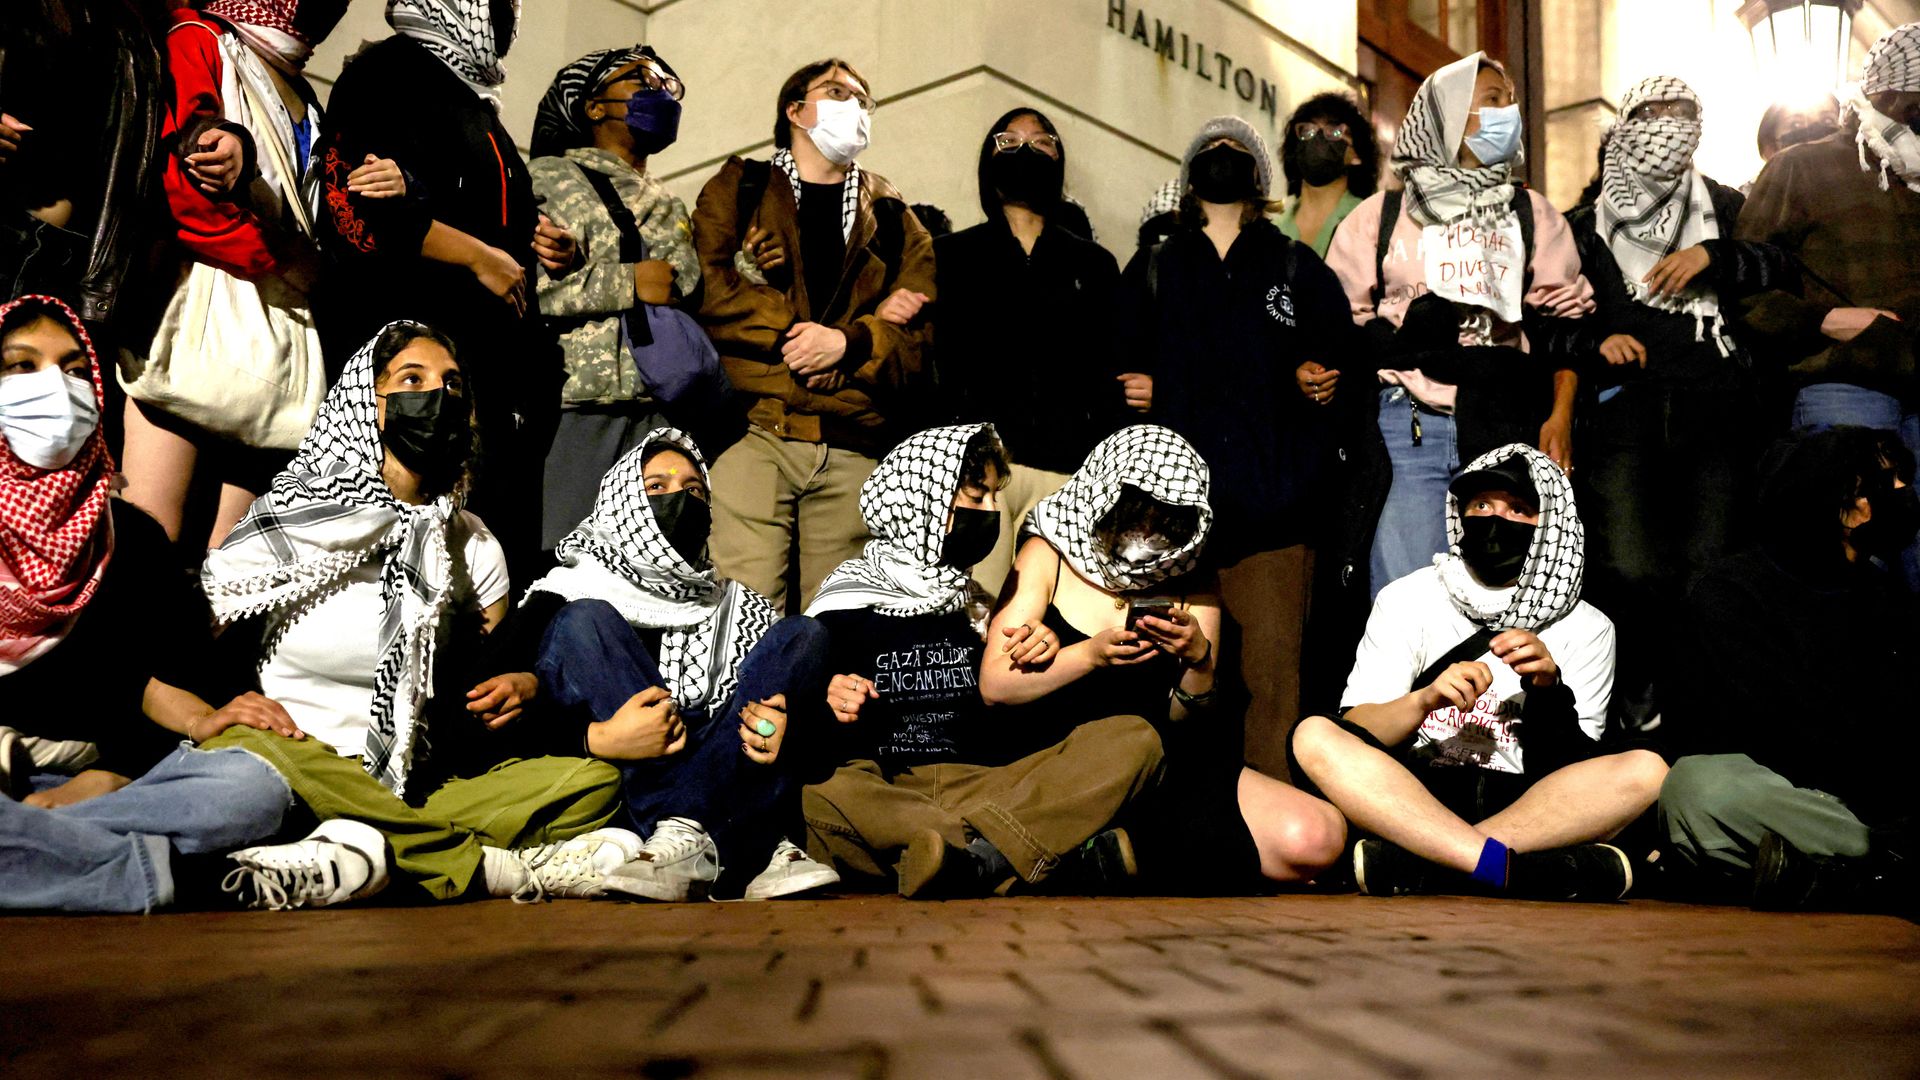 Pro-Palestinian protesters take over building at US university